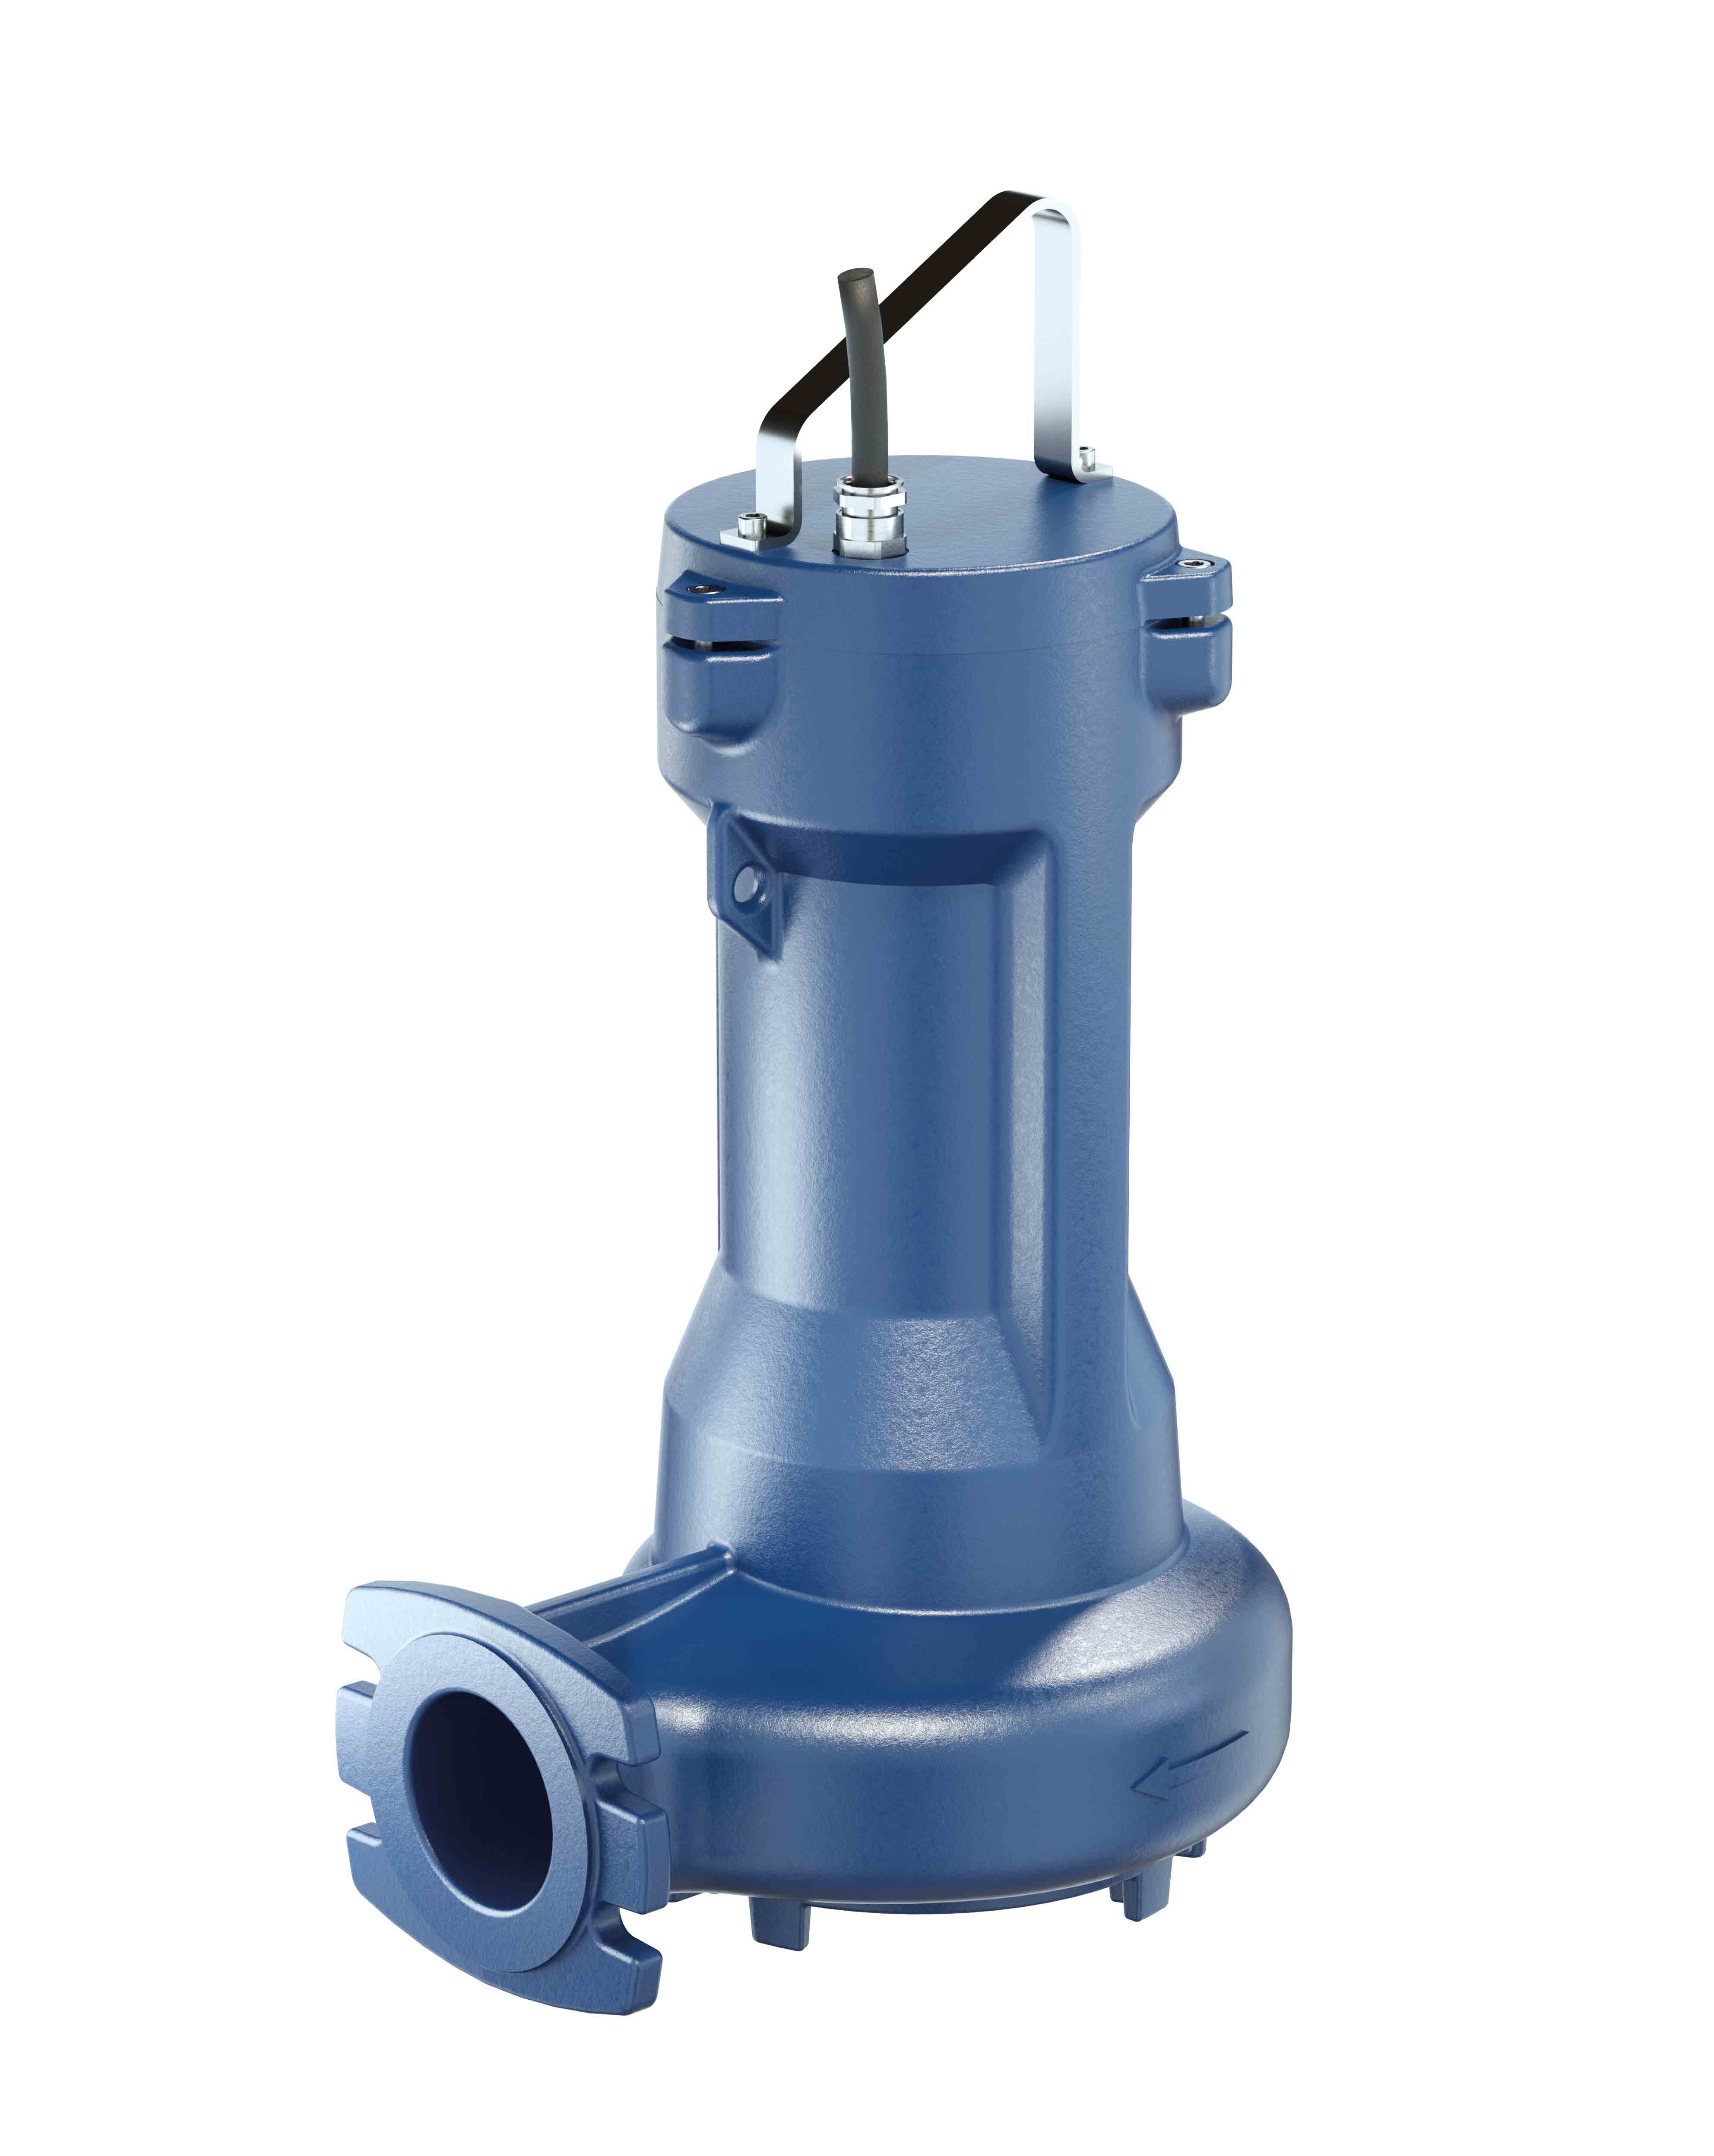 New waste water pump with efficient system from KSB | - The Online Magazine